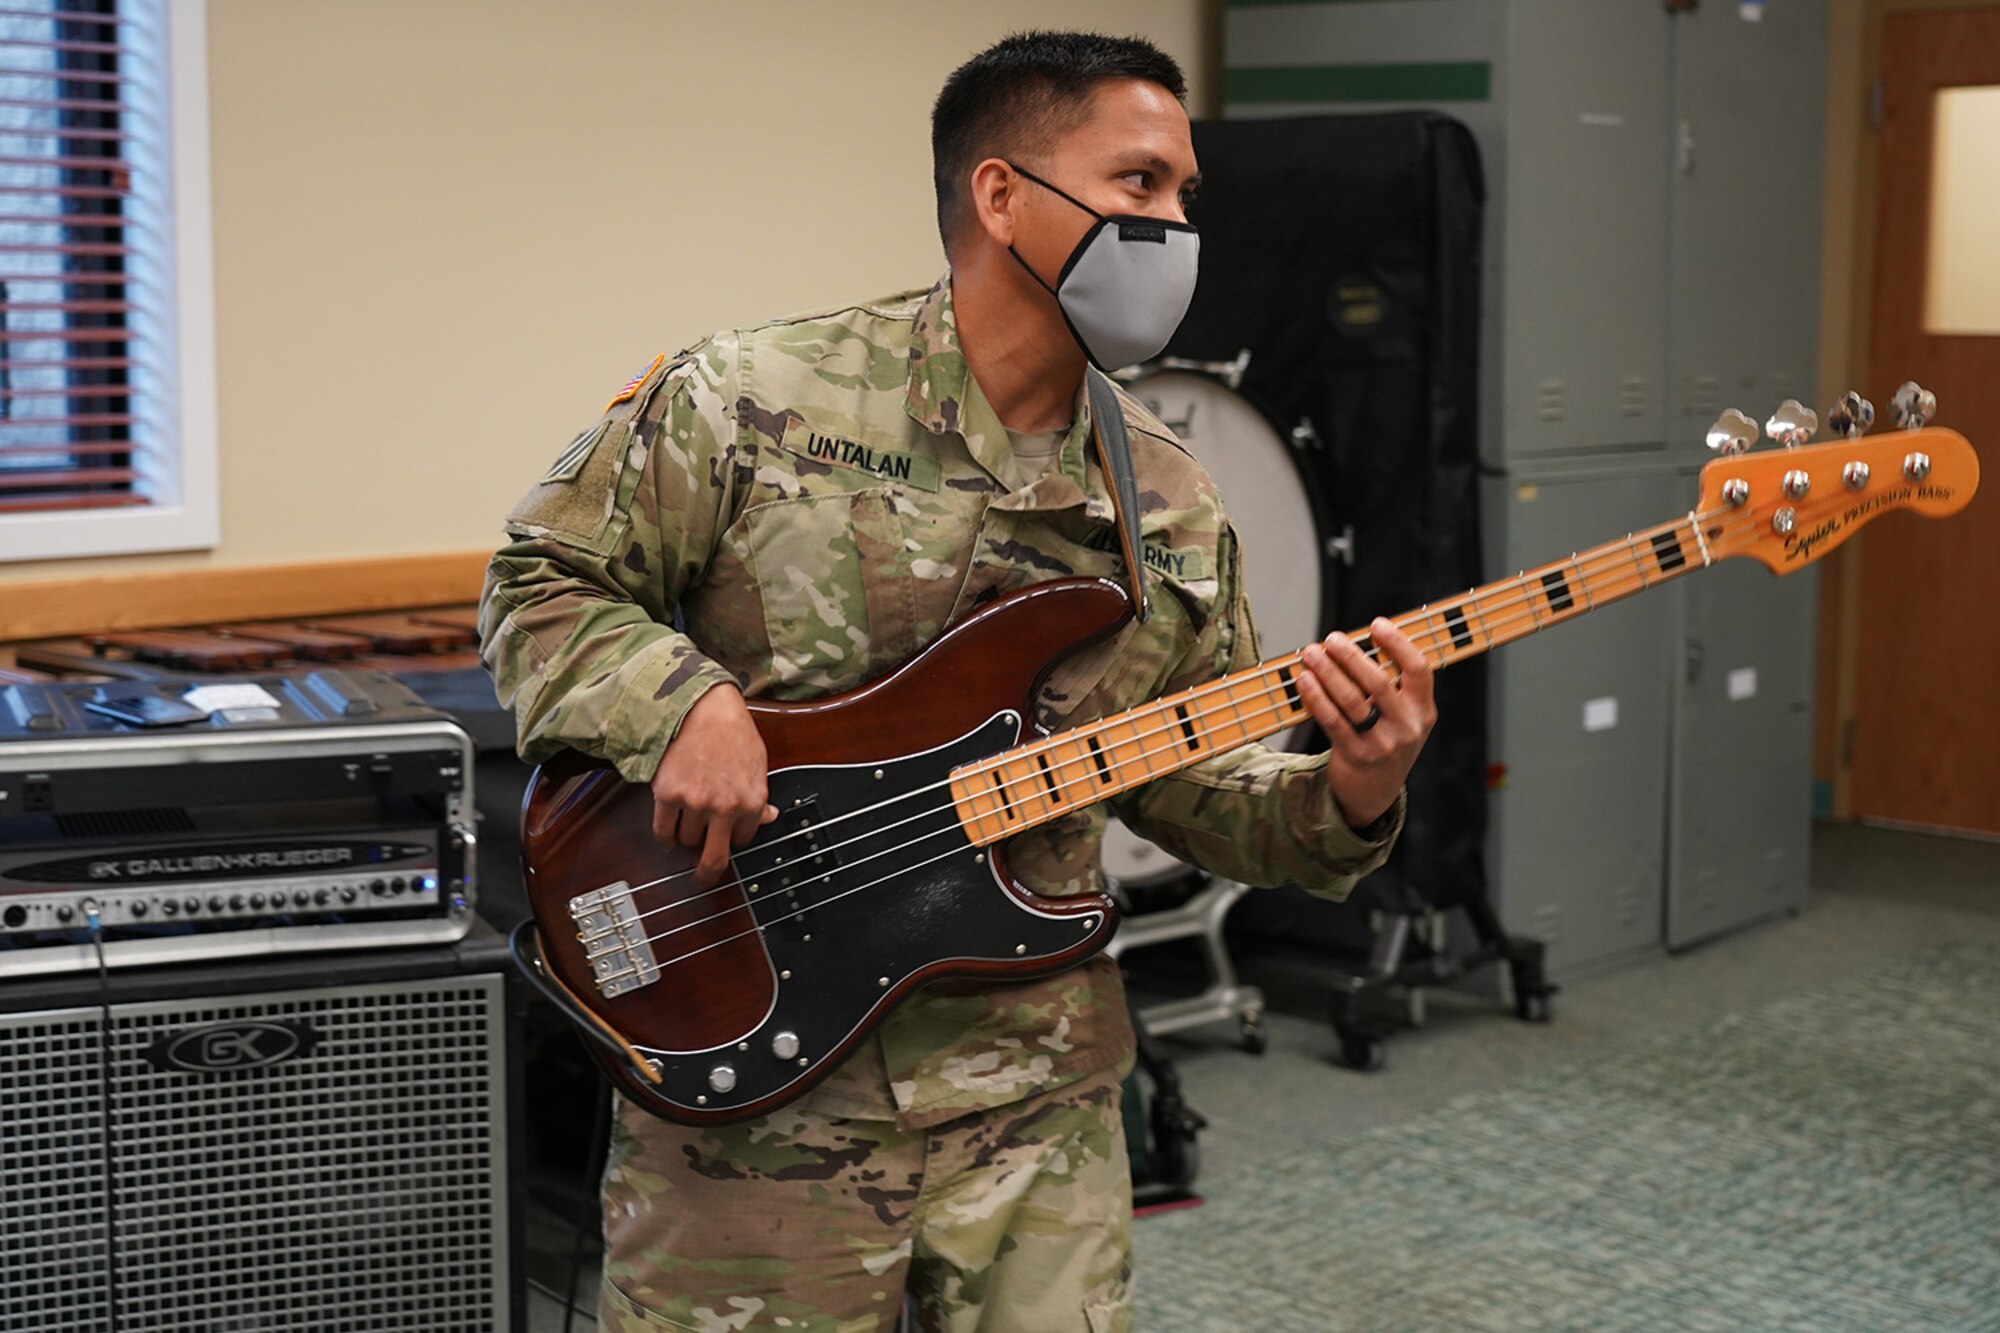 Army Sgt. Johndavid Untalan, a native of Dededo, Guam, and bassist assigned to the 9th Army Band, 17th Combat Sustainment Support Battalion, U.S. Army Alaska, rehearses in an open room at his unit headquarters on Joint Base Elmendorf-Richardson, Alaska, Sept. 17, 2020.